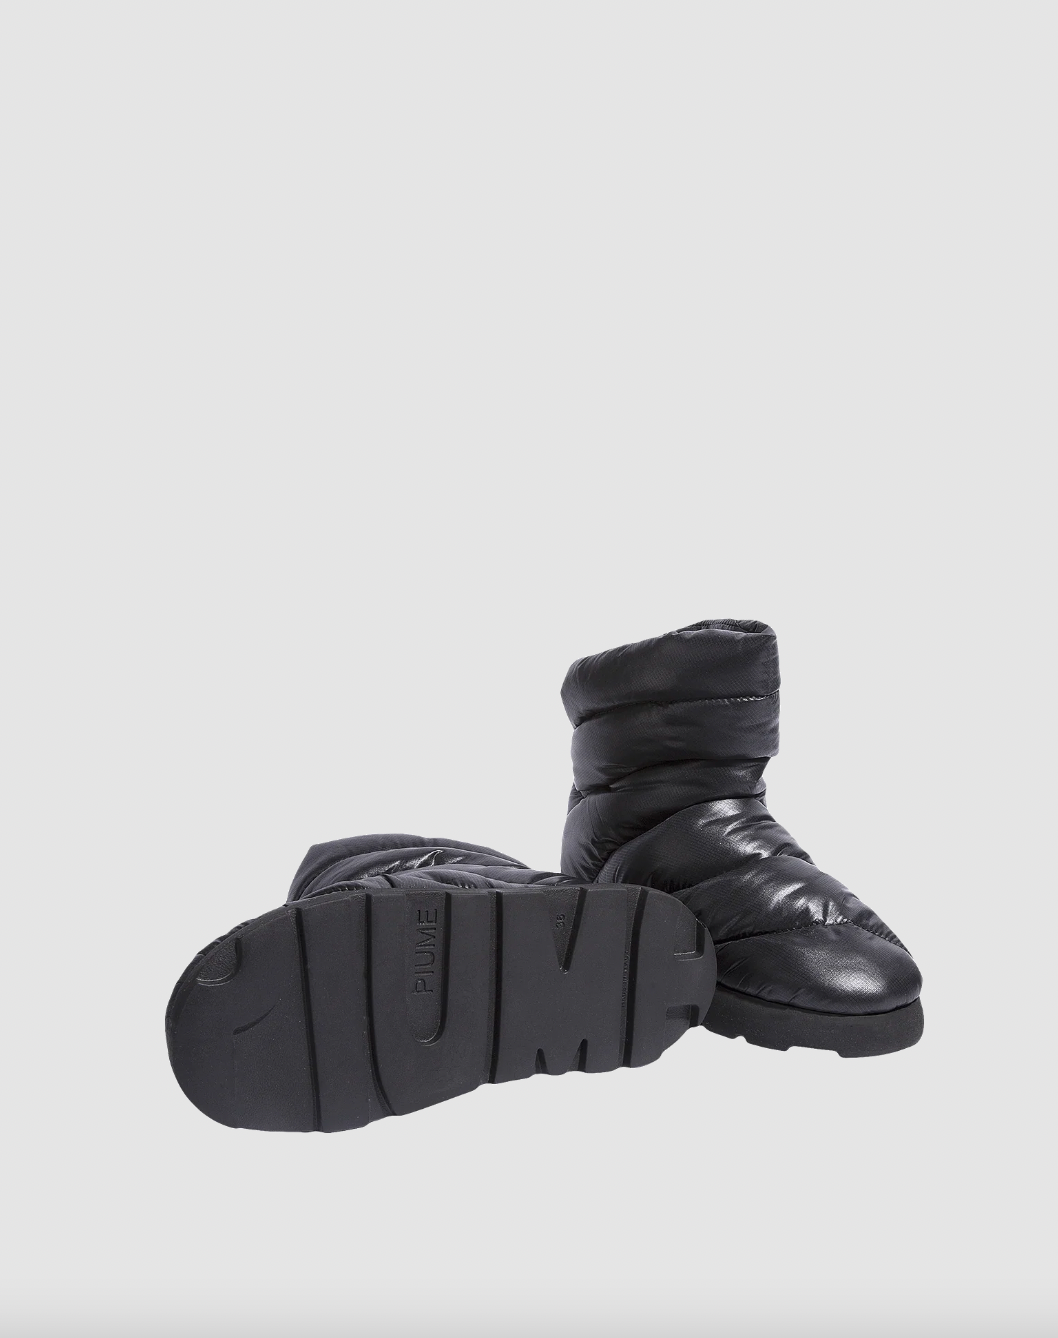 Product Image for Luna Boot, Black